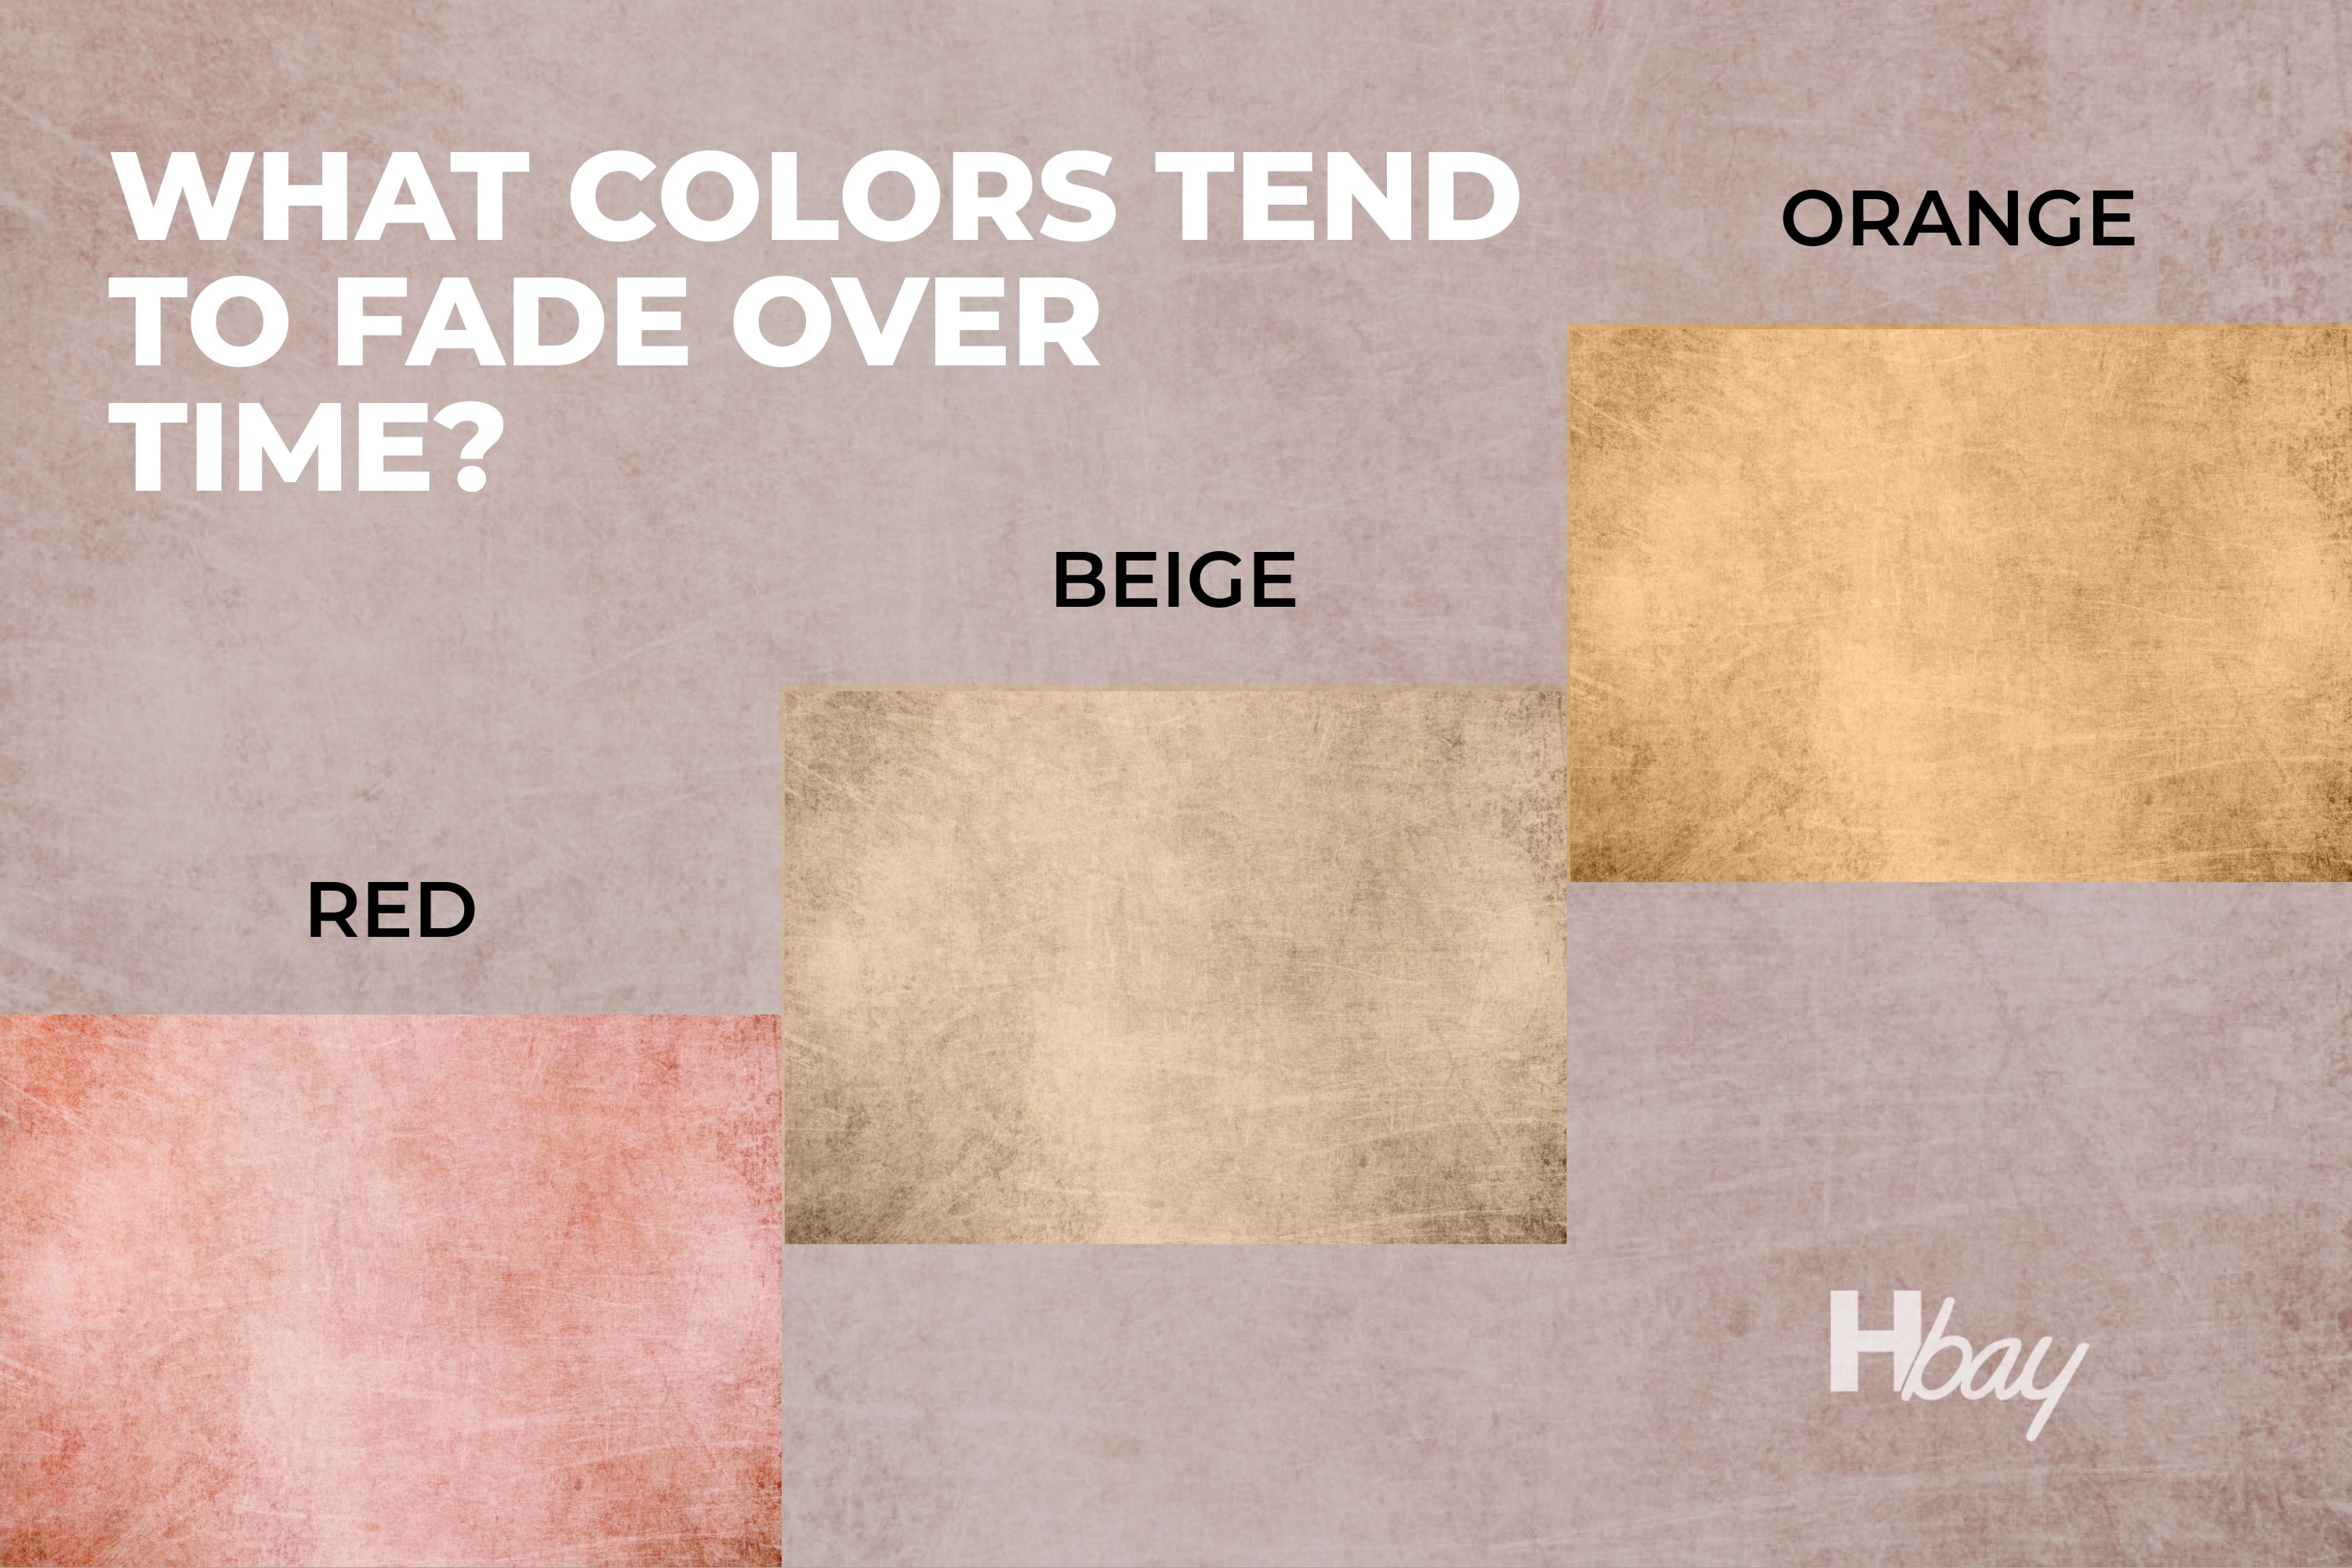 What colors tend to fade over time